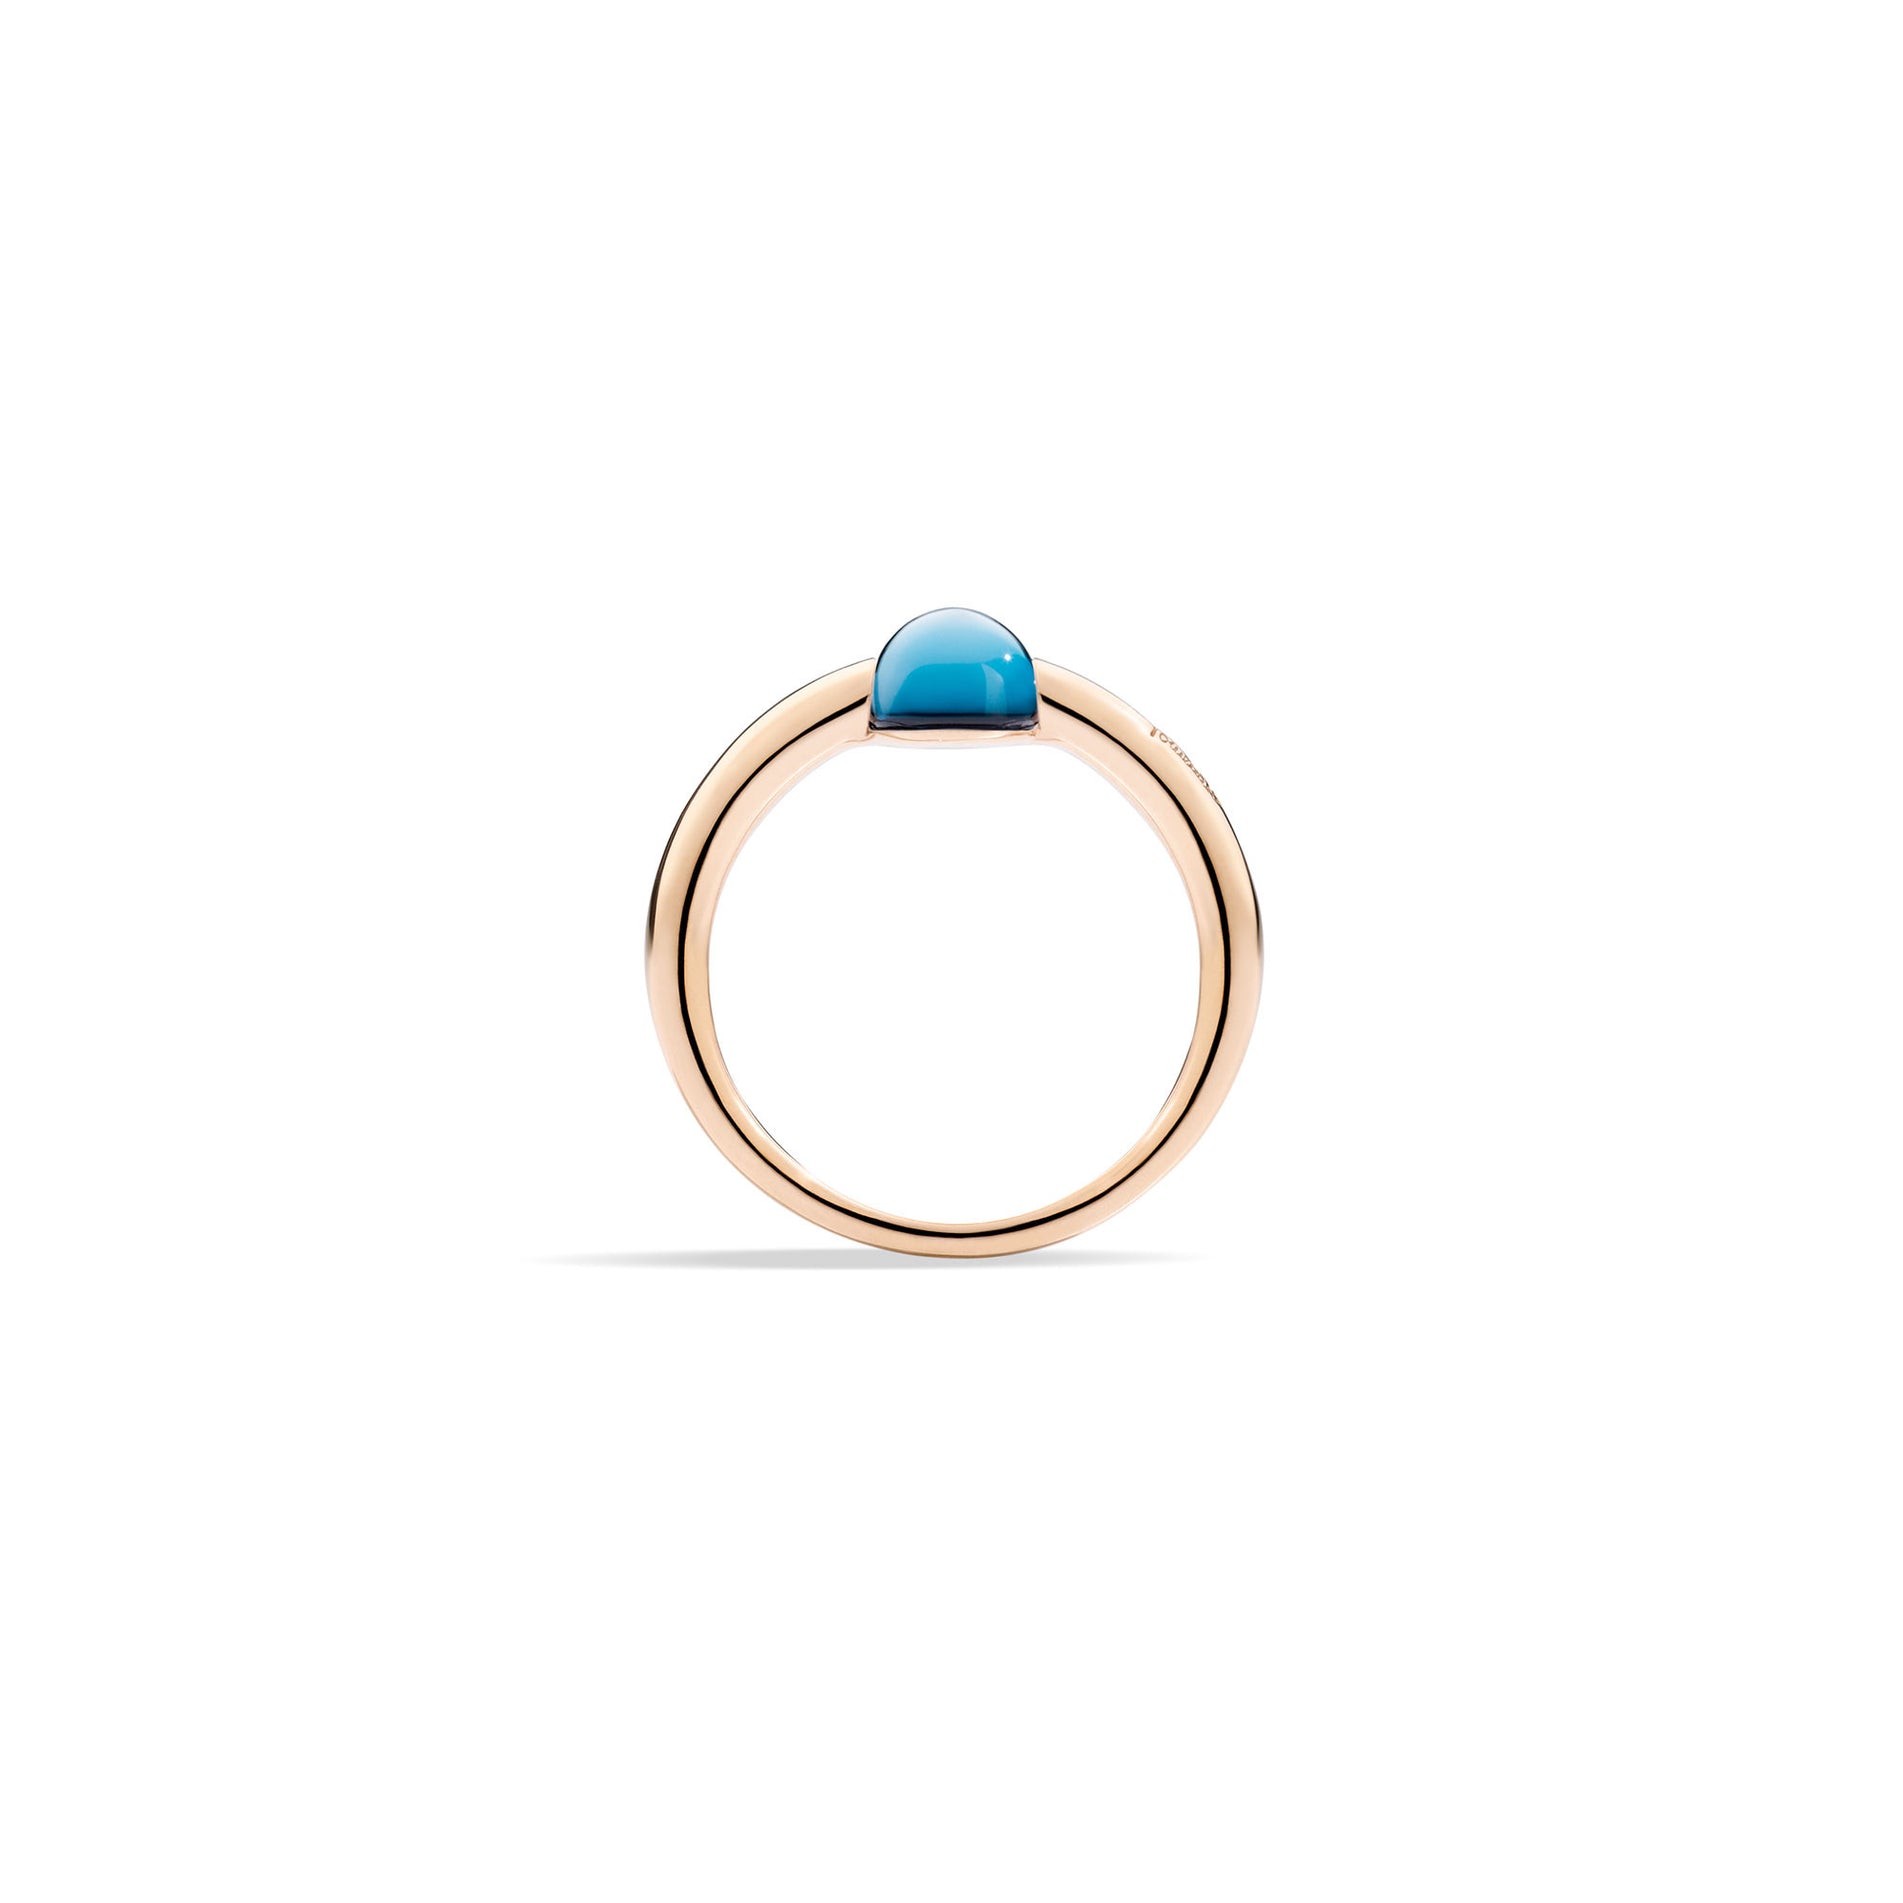 M'ama non M'ama Ring in 18k Rose Gold with London Blue Topaz - Orsini Jewellers NZ